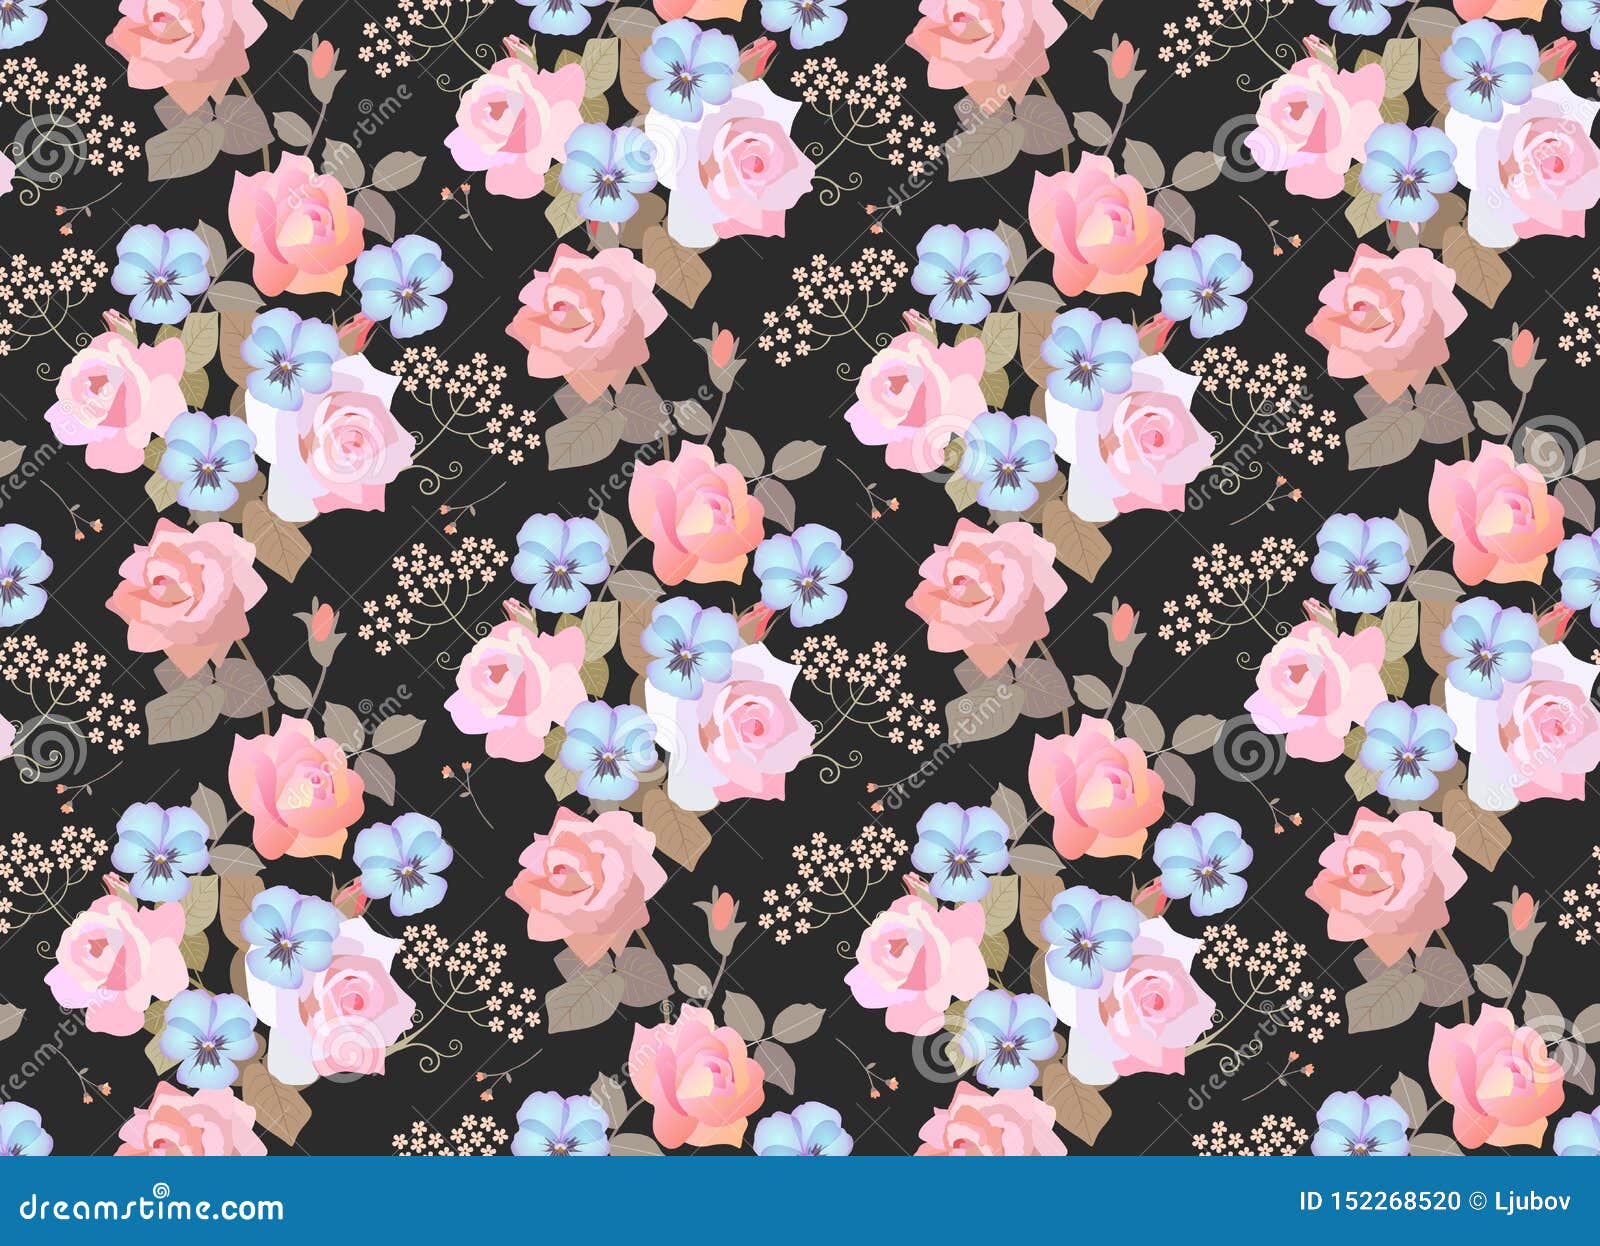 seamless floral pattern with garlands of ligth pink roses, blue pansies and umbrella flowers on black background. luxury print